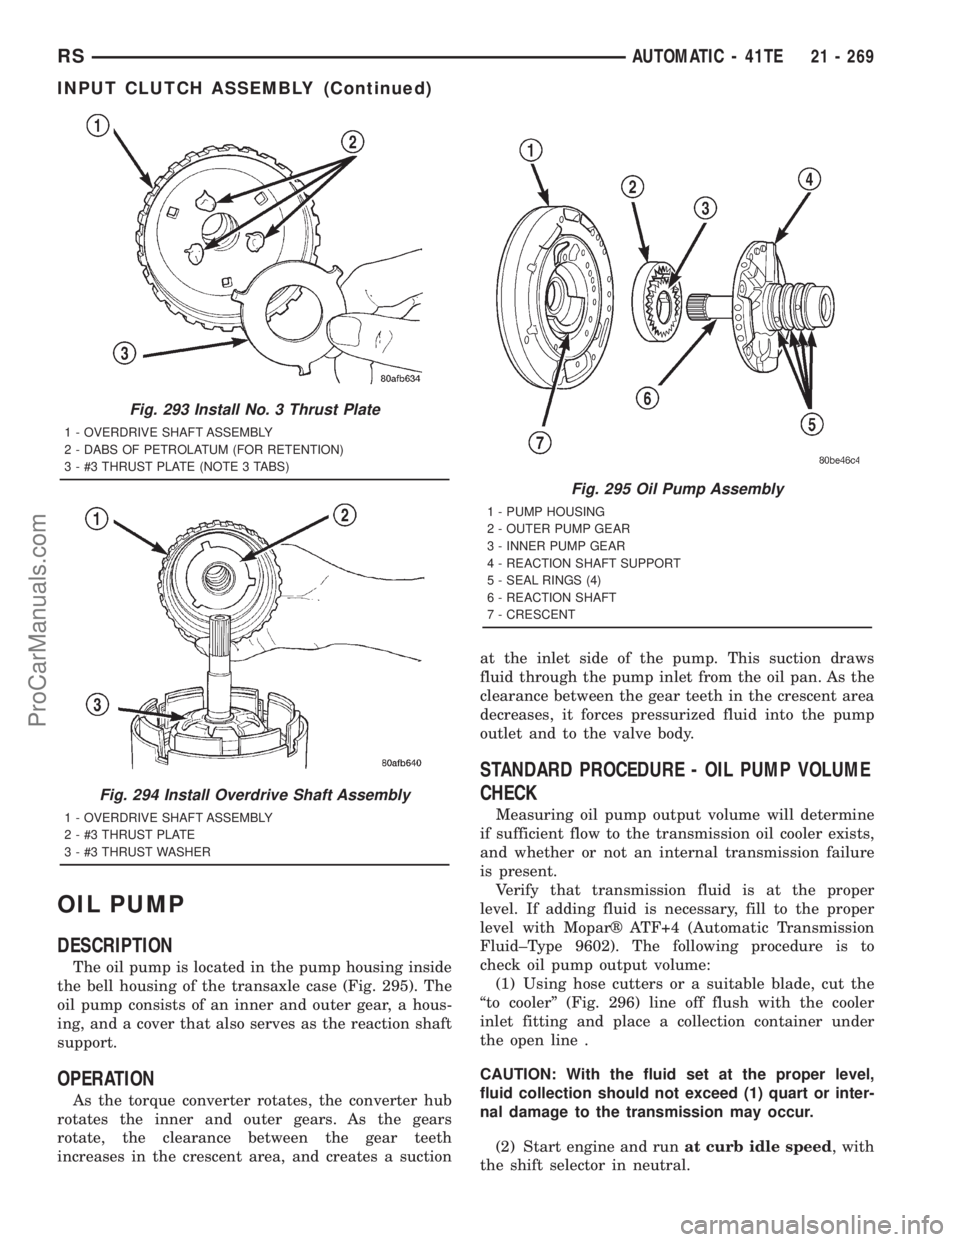 DODGE TOWN AND COUNTRY 2001  Service Manual OIL PUMP
DESCRIPTION
The oil pump is located in the pump housing inside
the bell housing of the transaxle case (Fig. 295). The
oil pump consists of an inner and outer gear, a hous-
ing, and a cover th